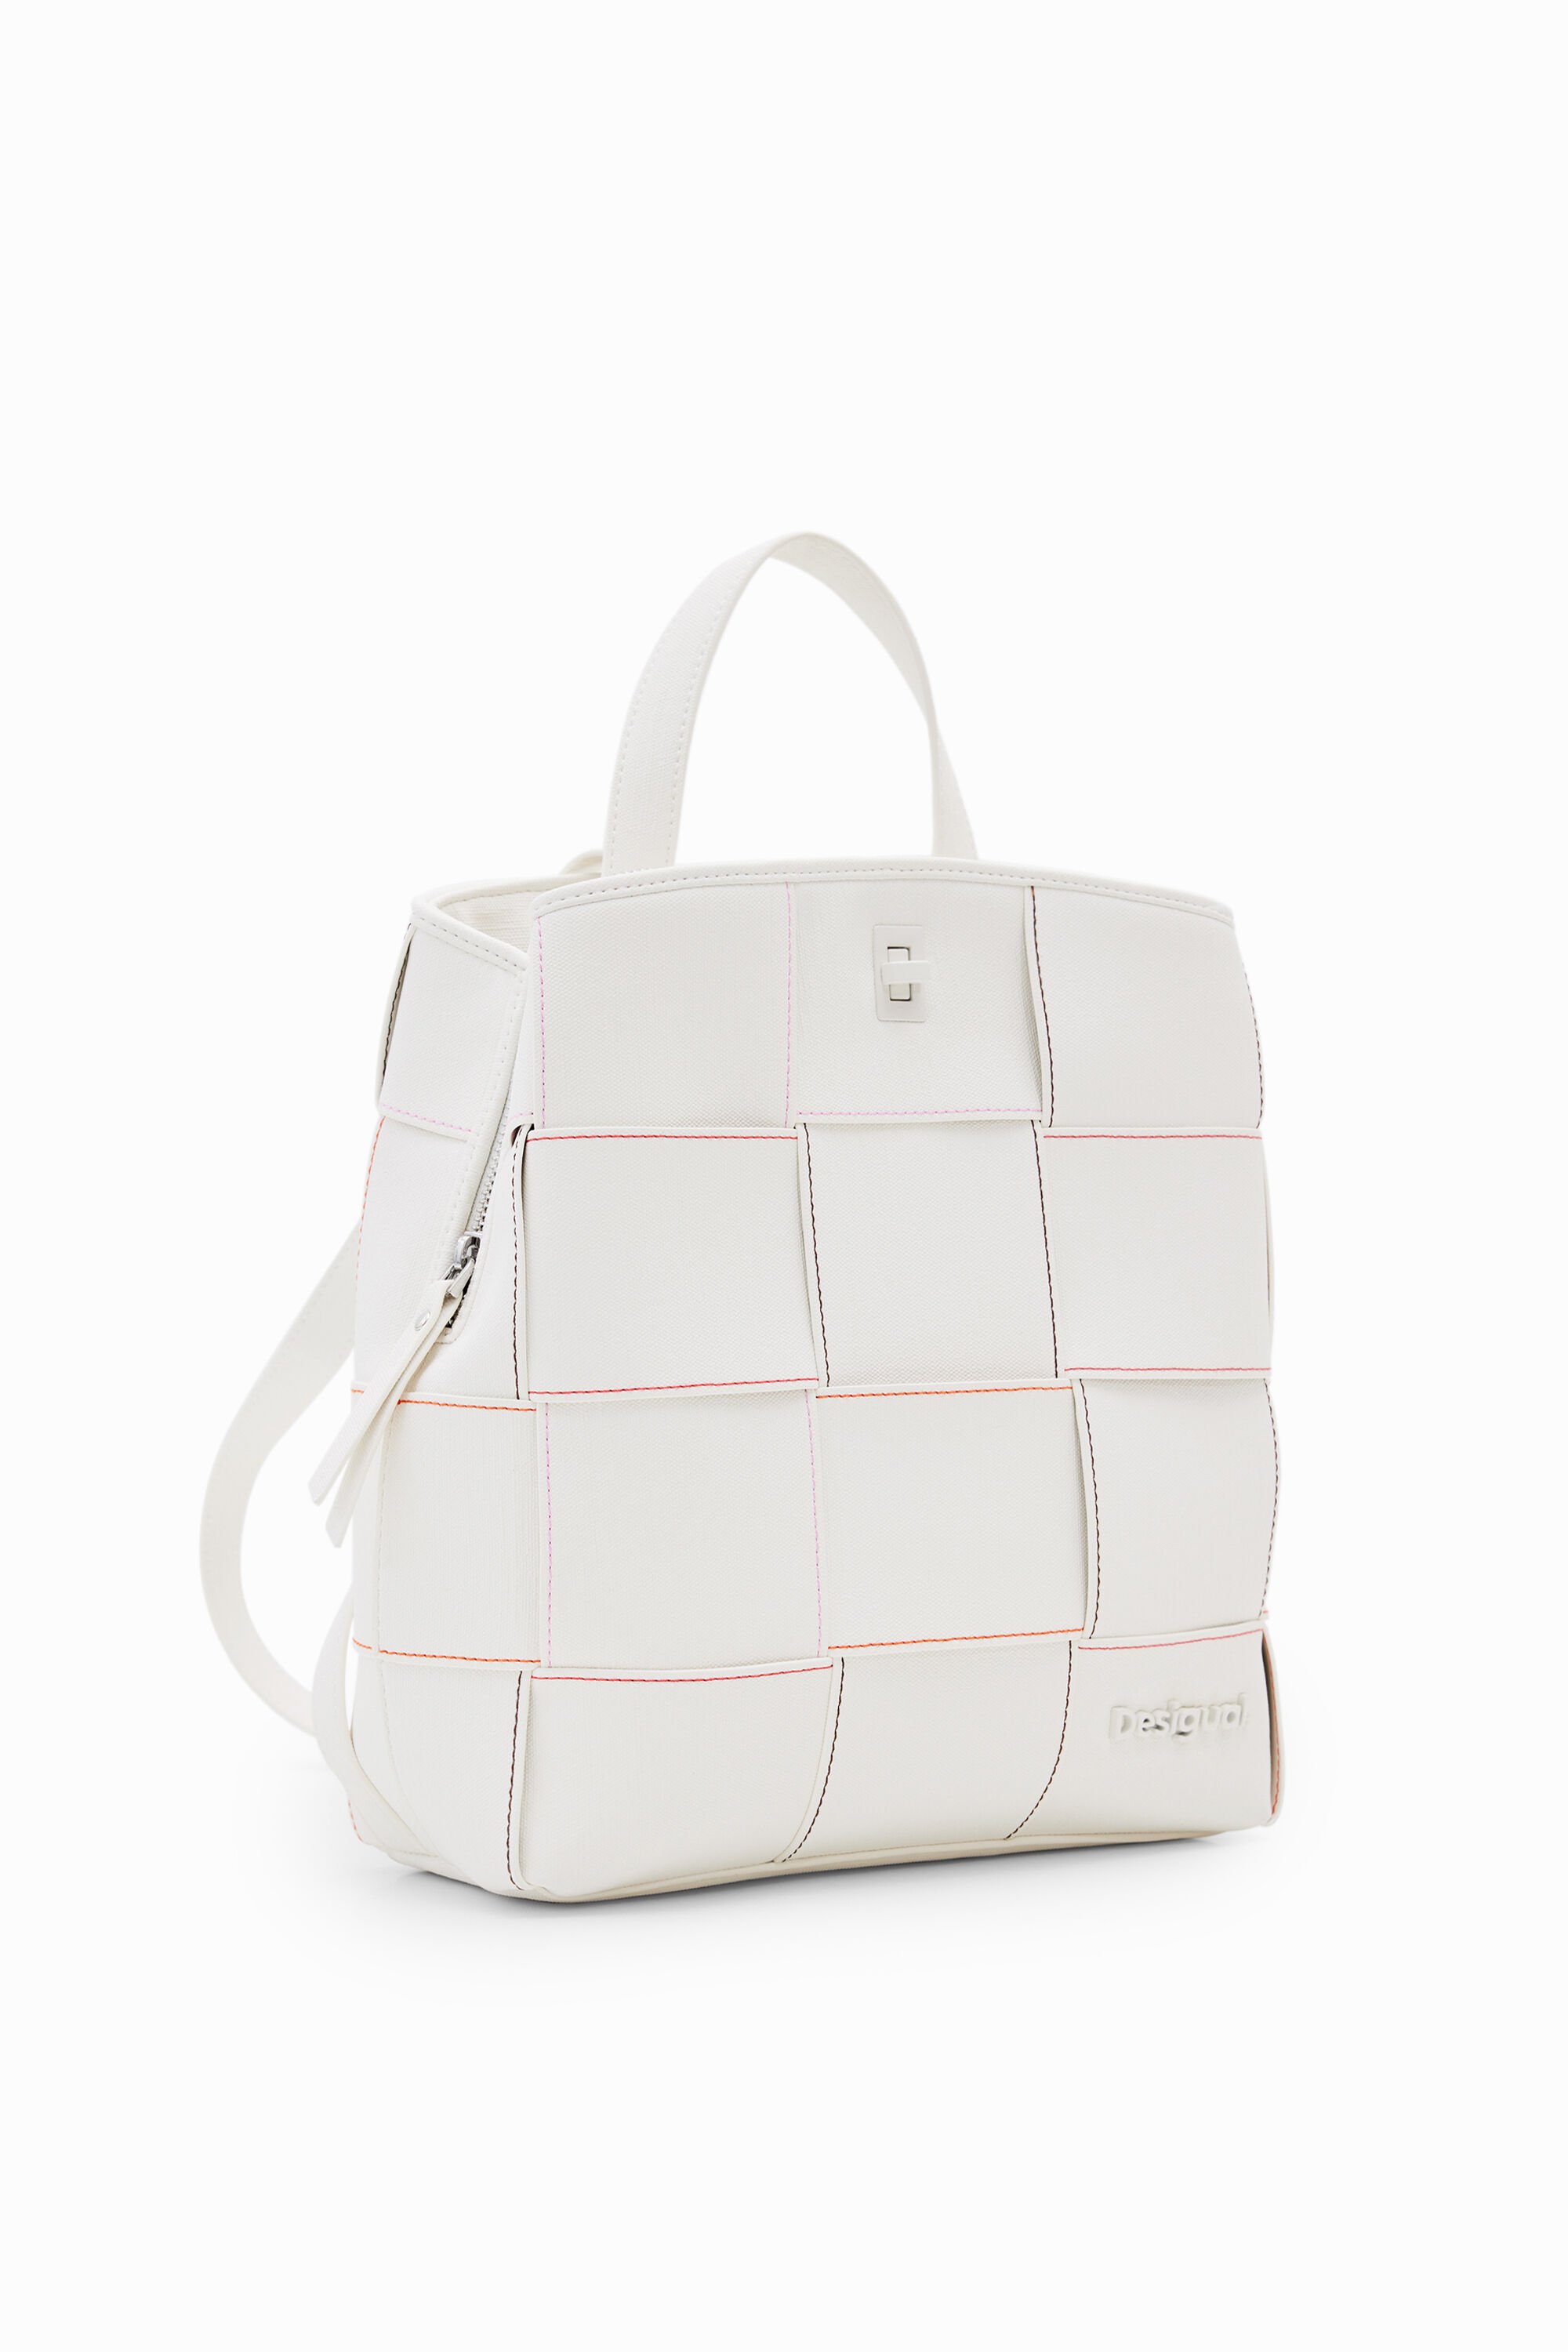 Desigual S woven backpack